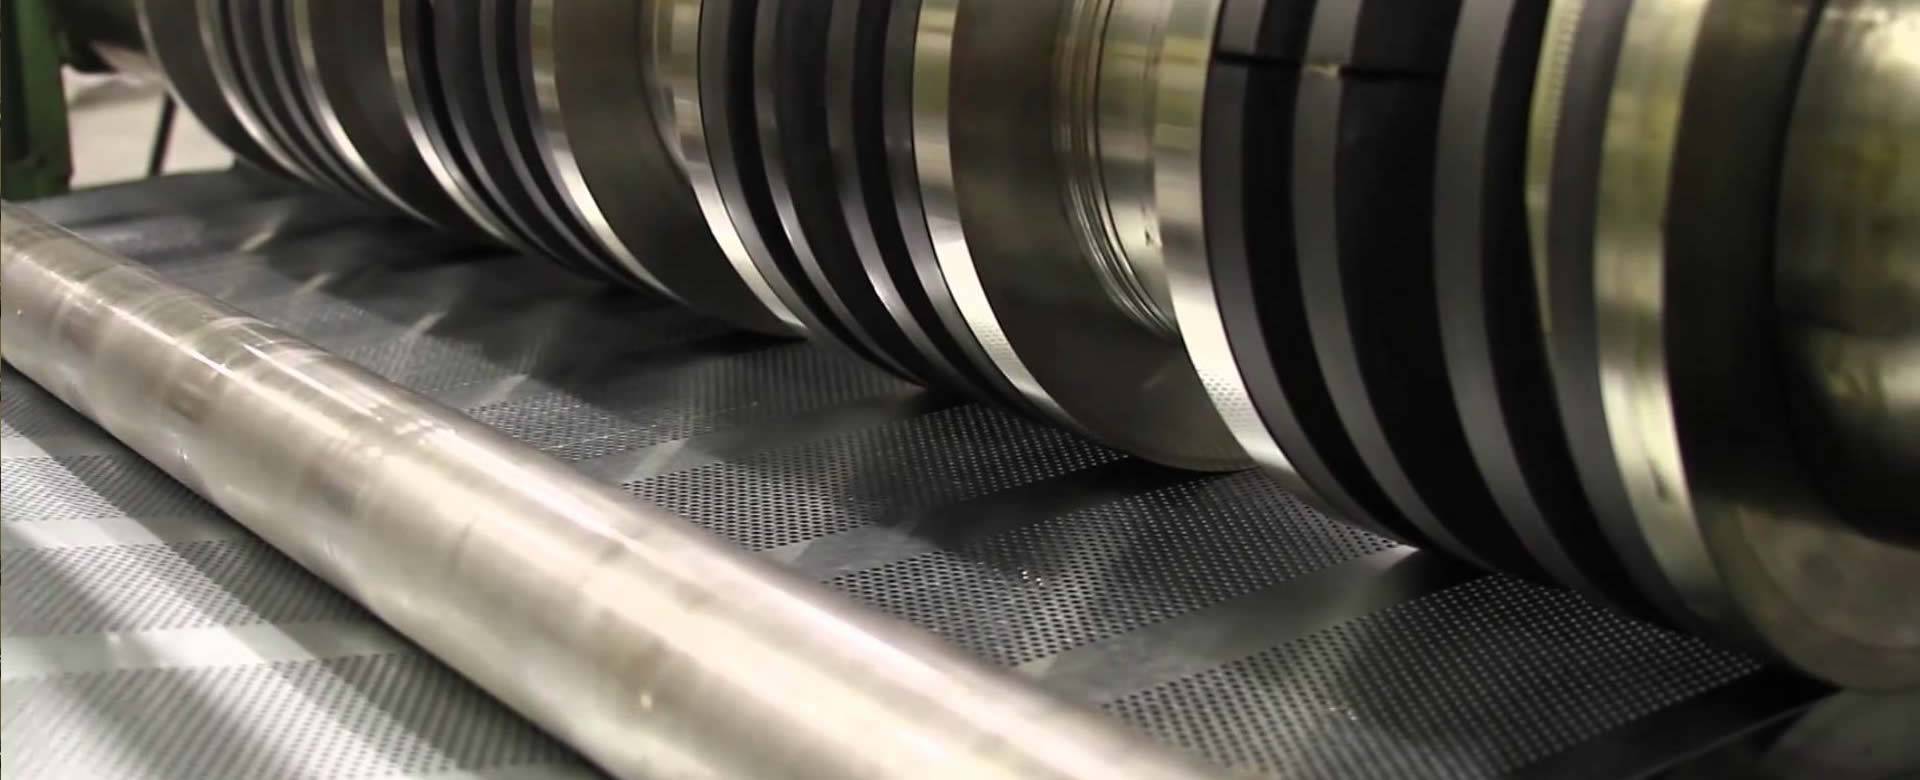 A flatten machine is planishing a piece of perforated metal sheet.